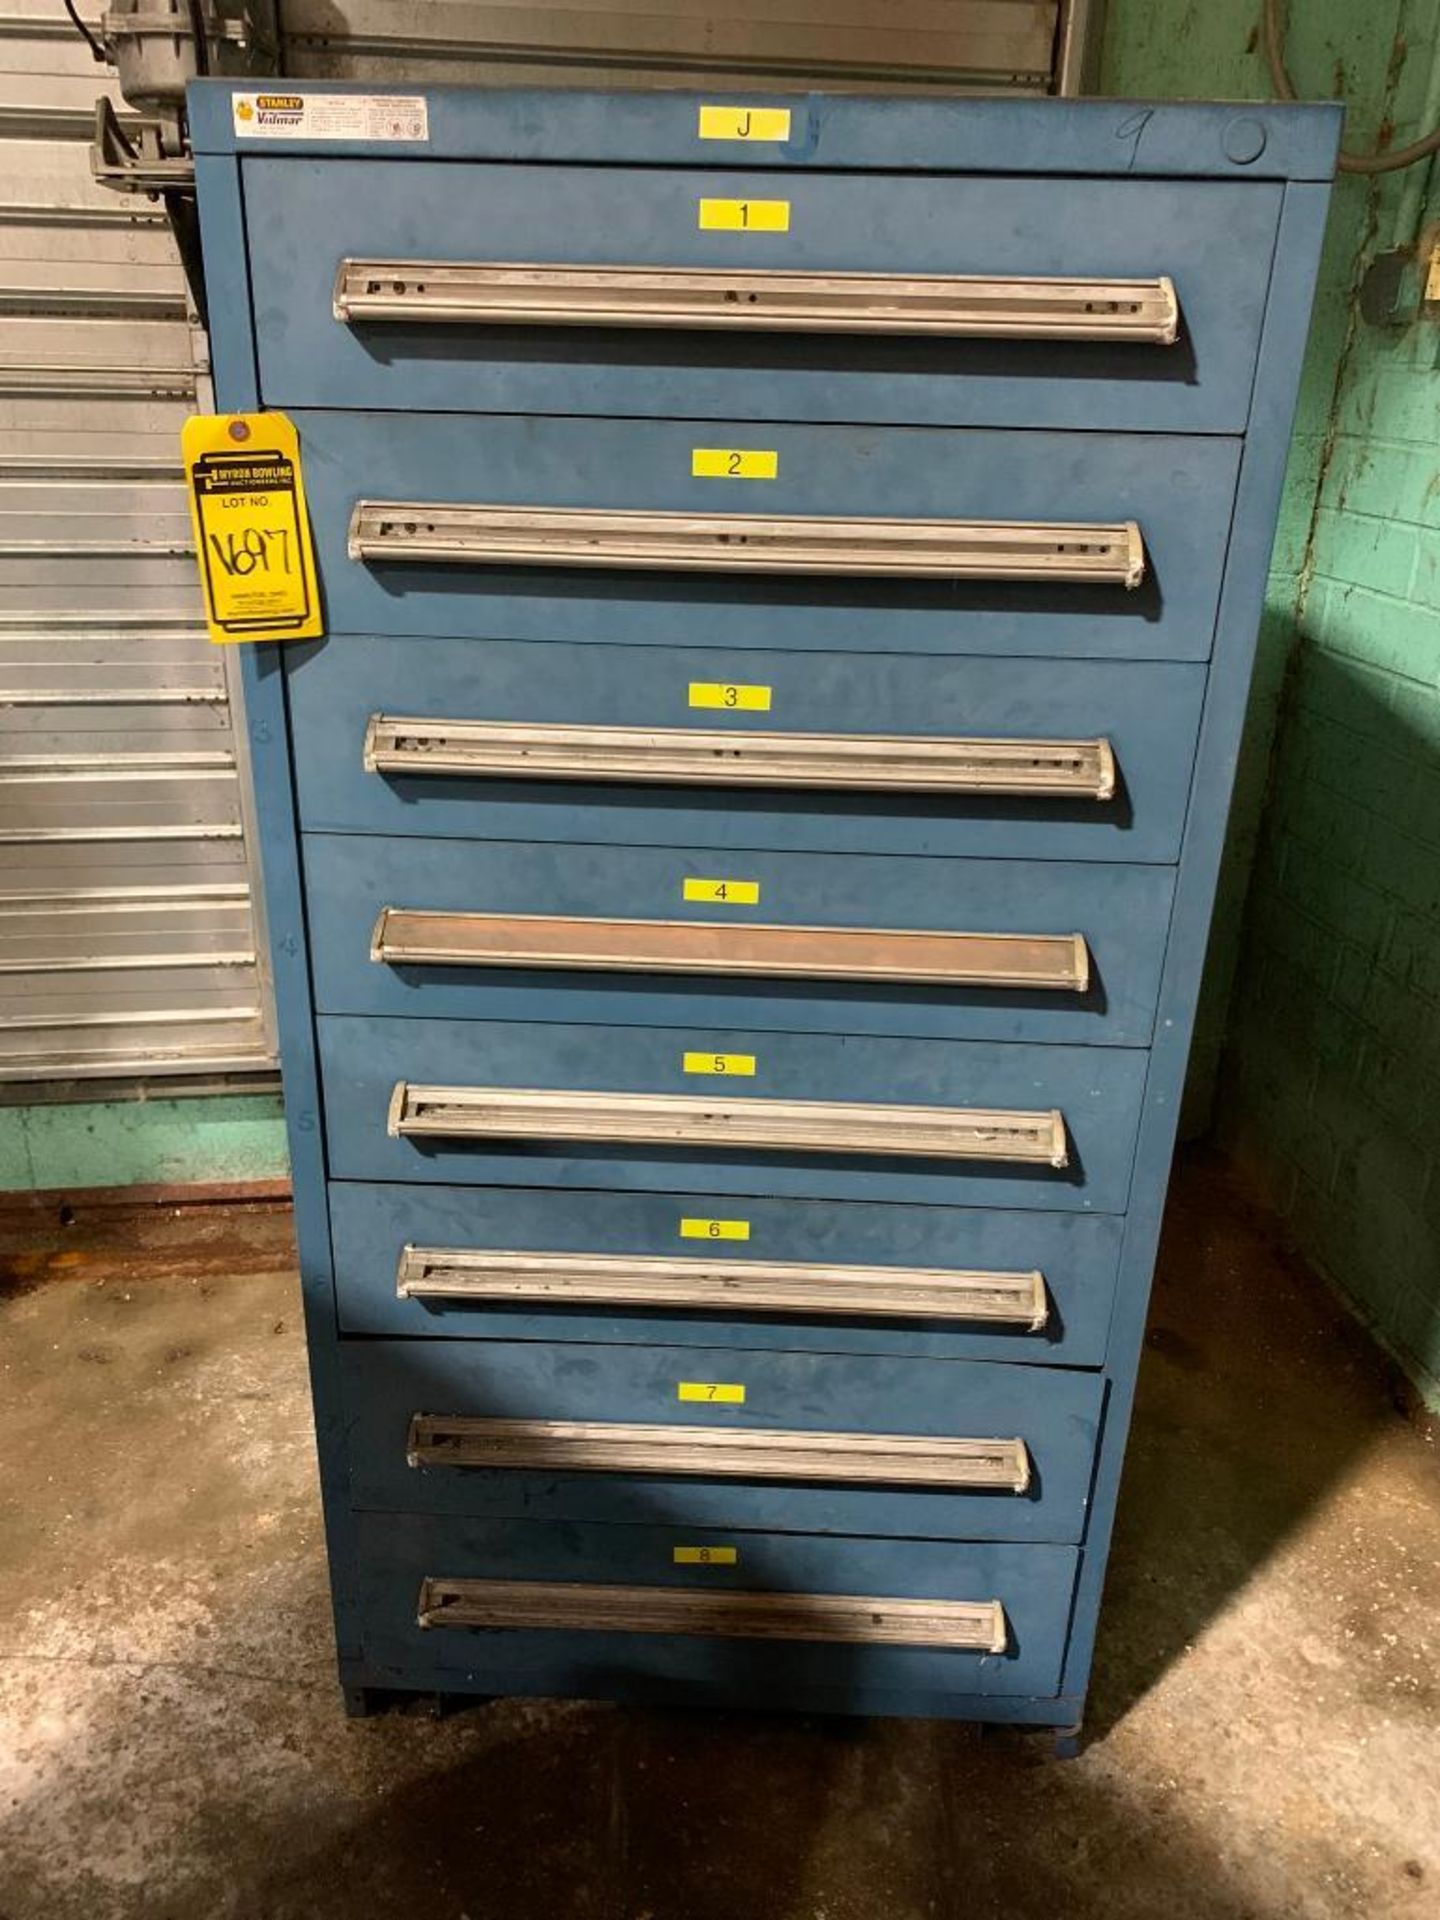 Stanley Vidmar 8-Drawer Cabinet w/ Assorted Switches, Relays, Timers, Electrical Connectors